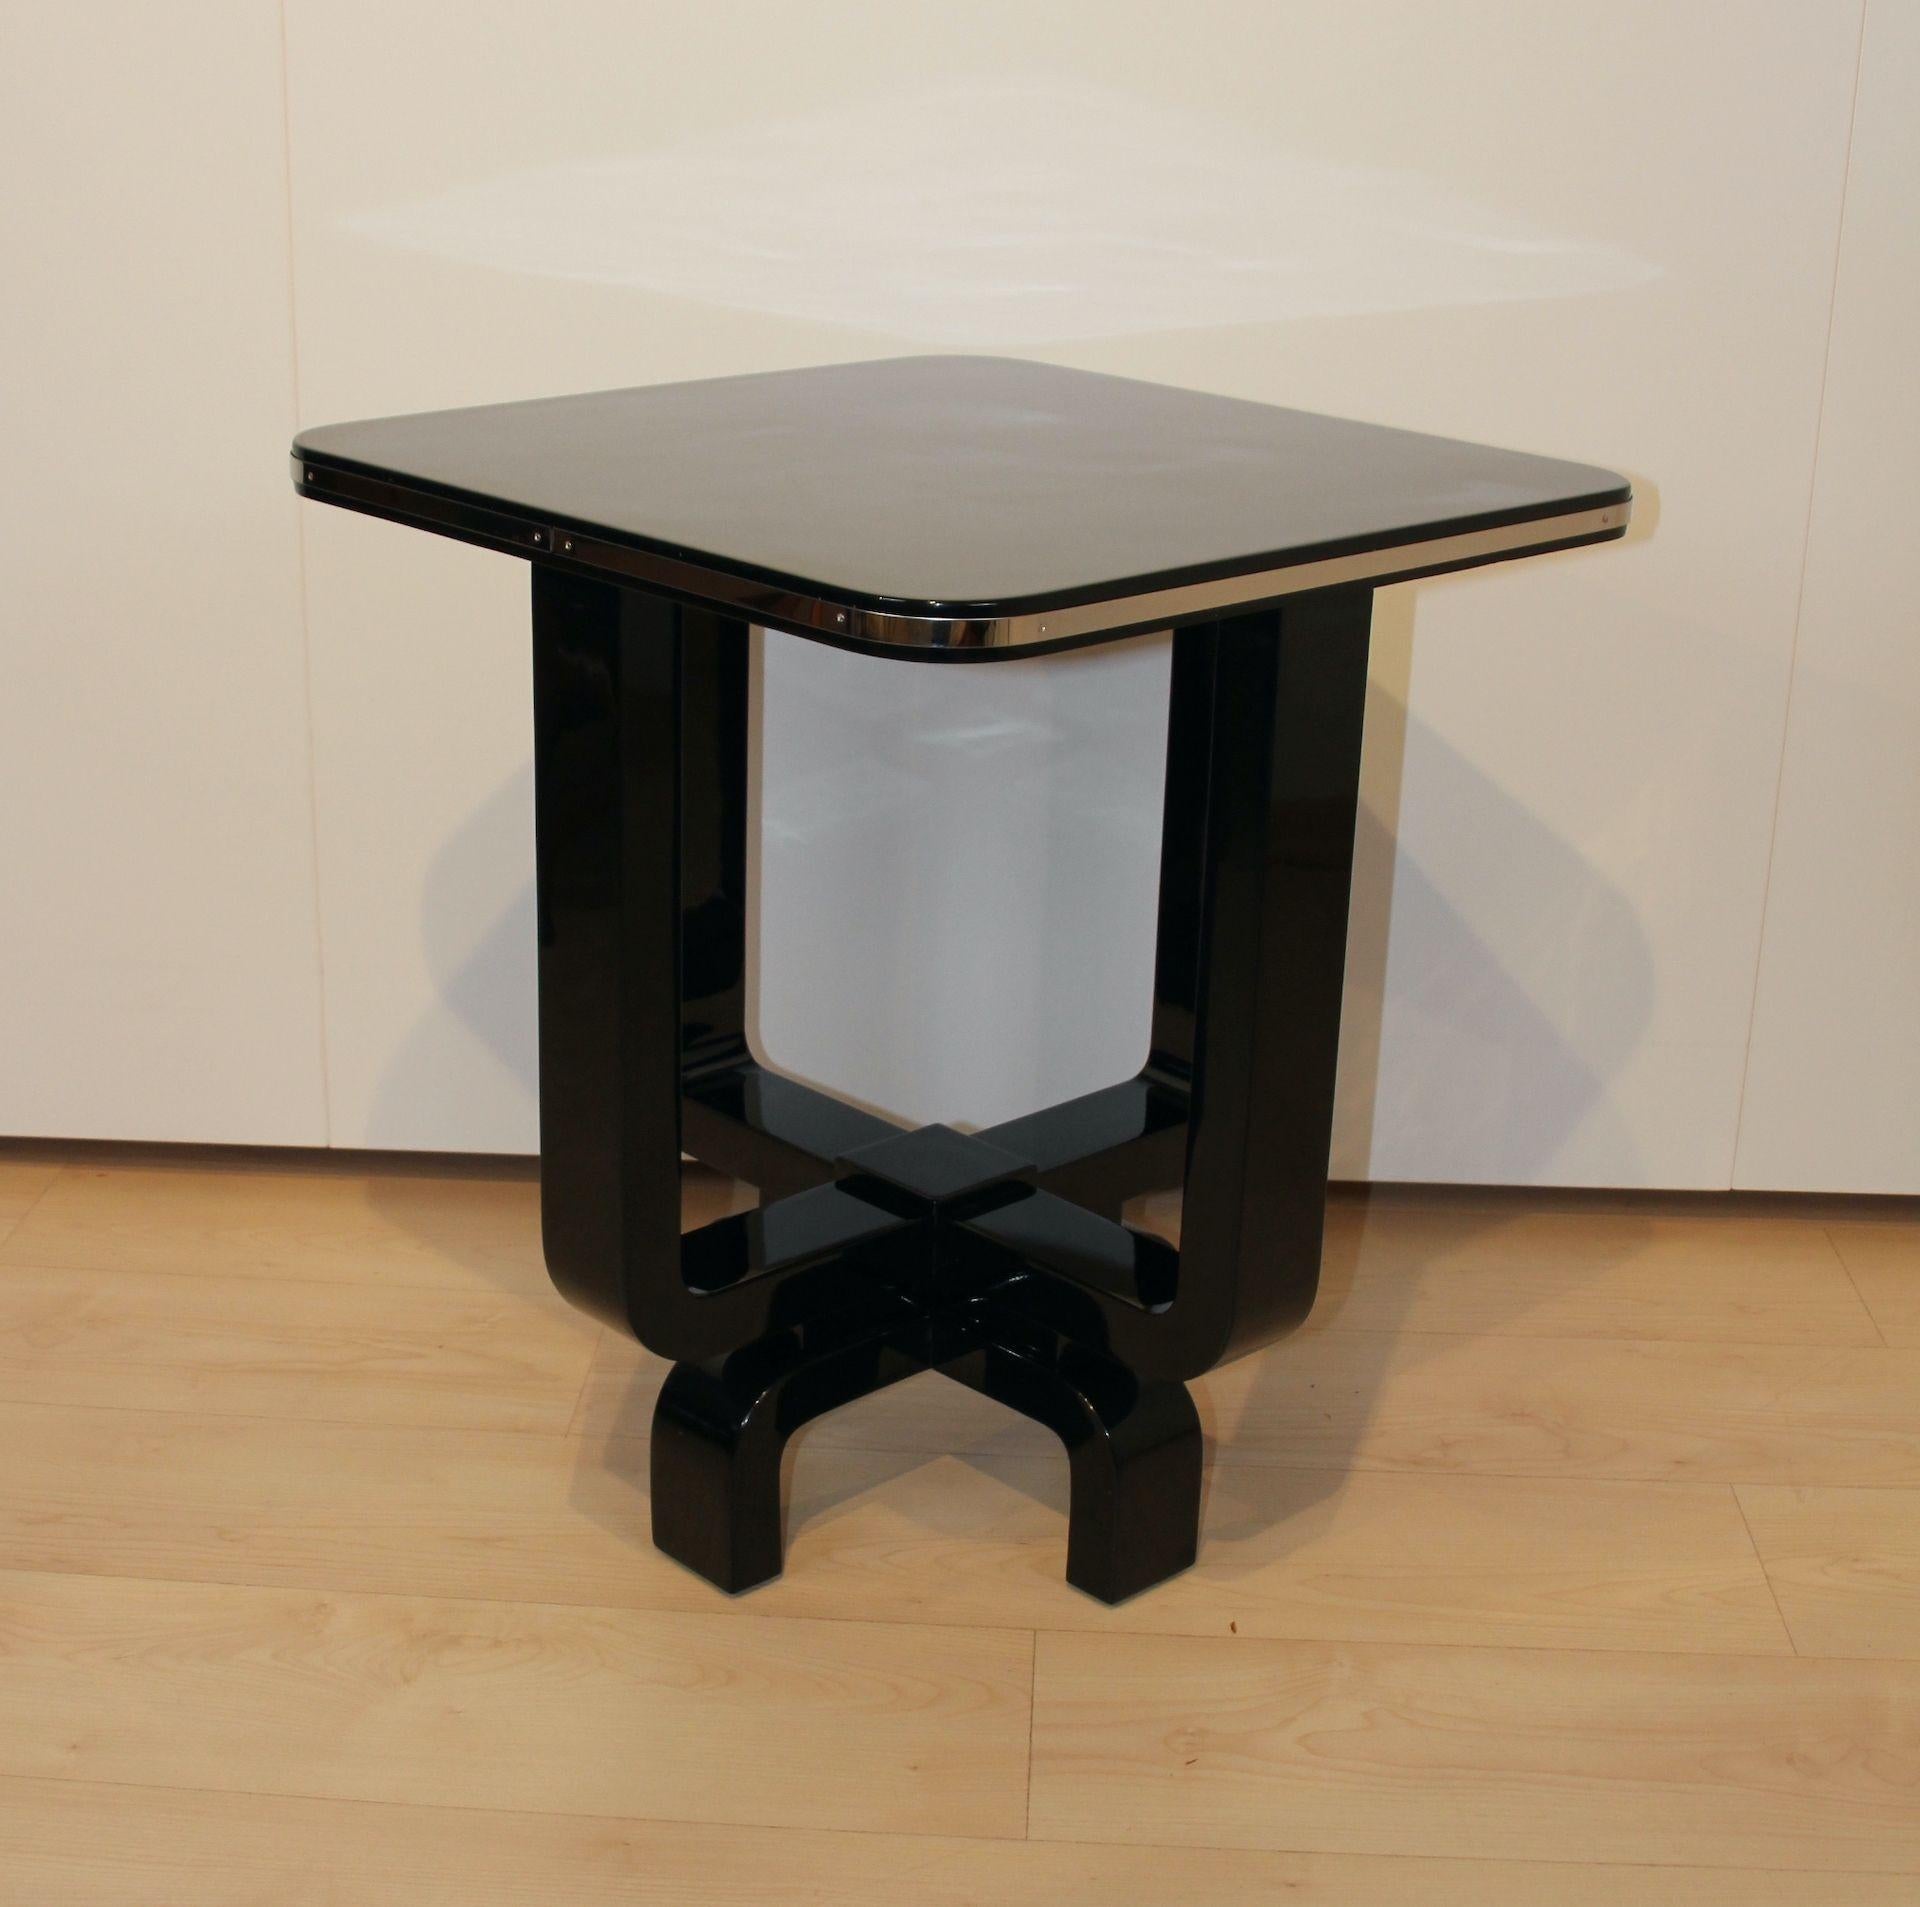 Stainless Steel Four-legged Art Deco Side Table, Black Lacquer and Metal, France circa 193